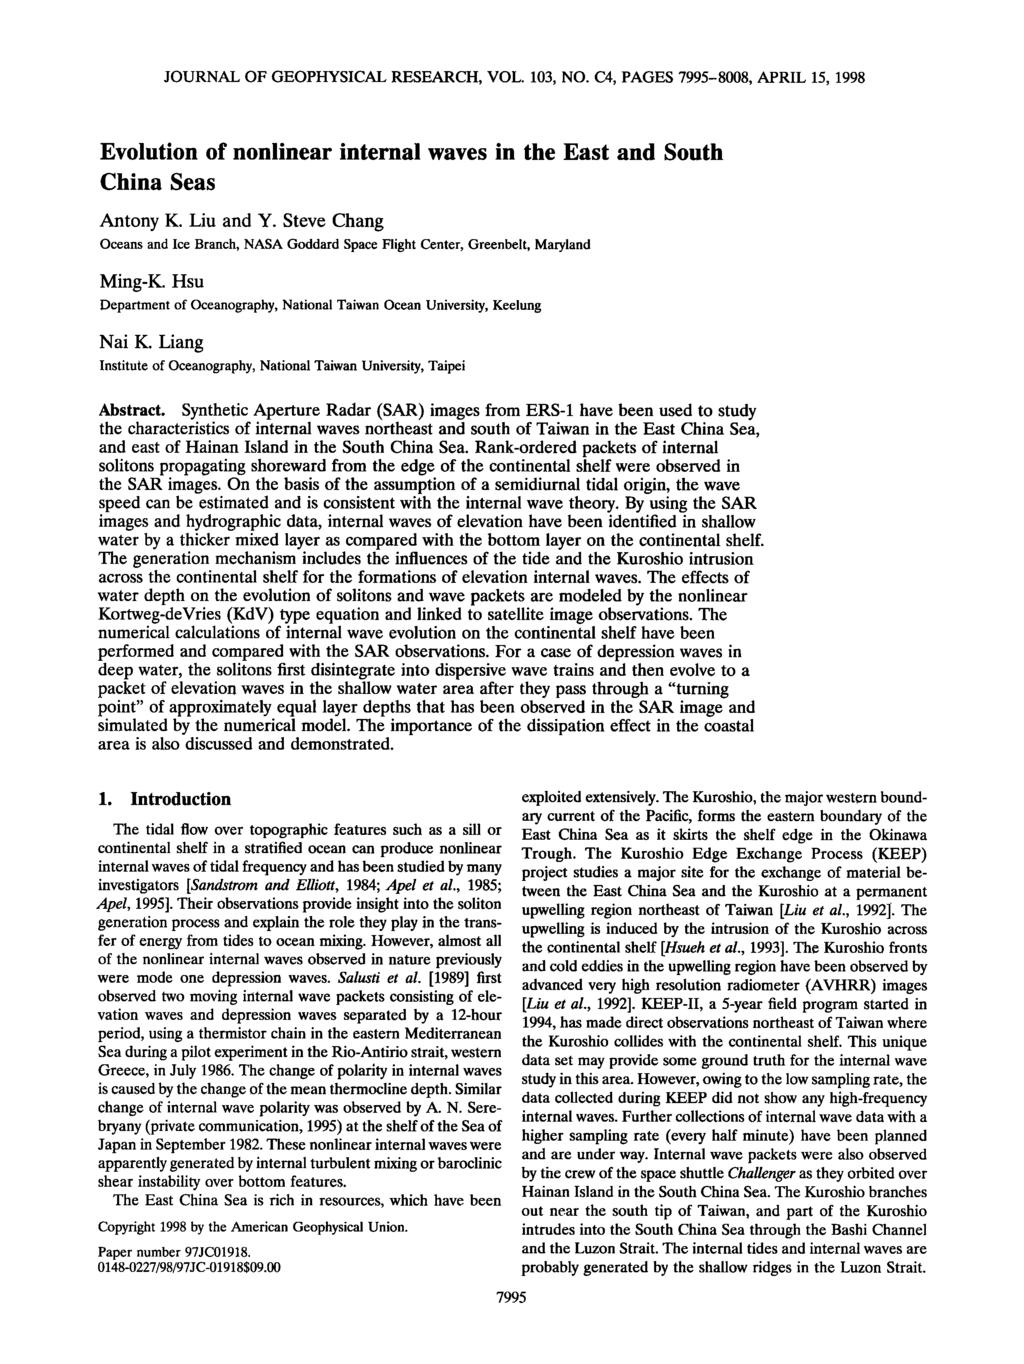 JOURNAL OF GEOPHYSICAL RESEARCH, VOL. 103, NO. C4, PAGES 7995-8008, APRIL 15, 1998 Evolution of nonlinear internal waves in the East and South China Seas Antony K. Liu and Y.